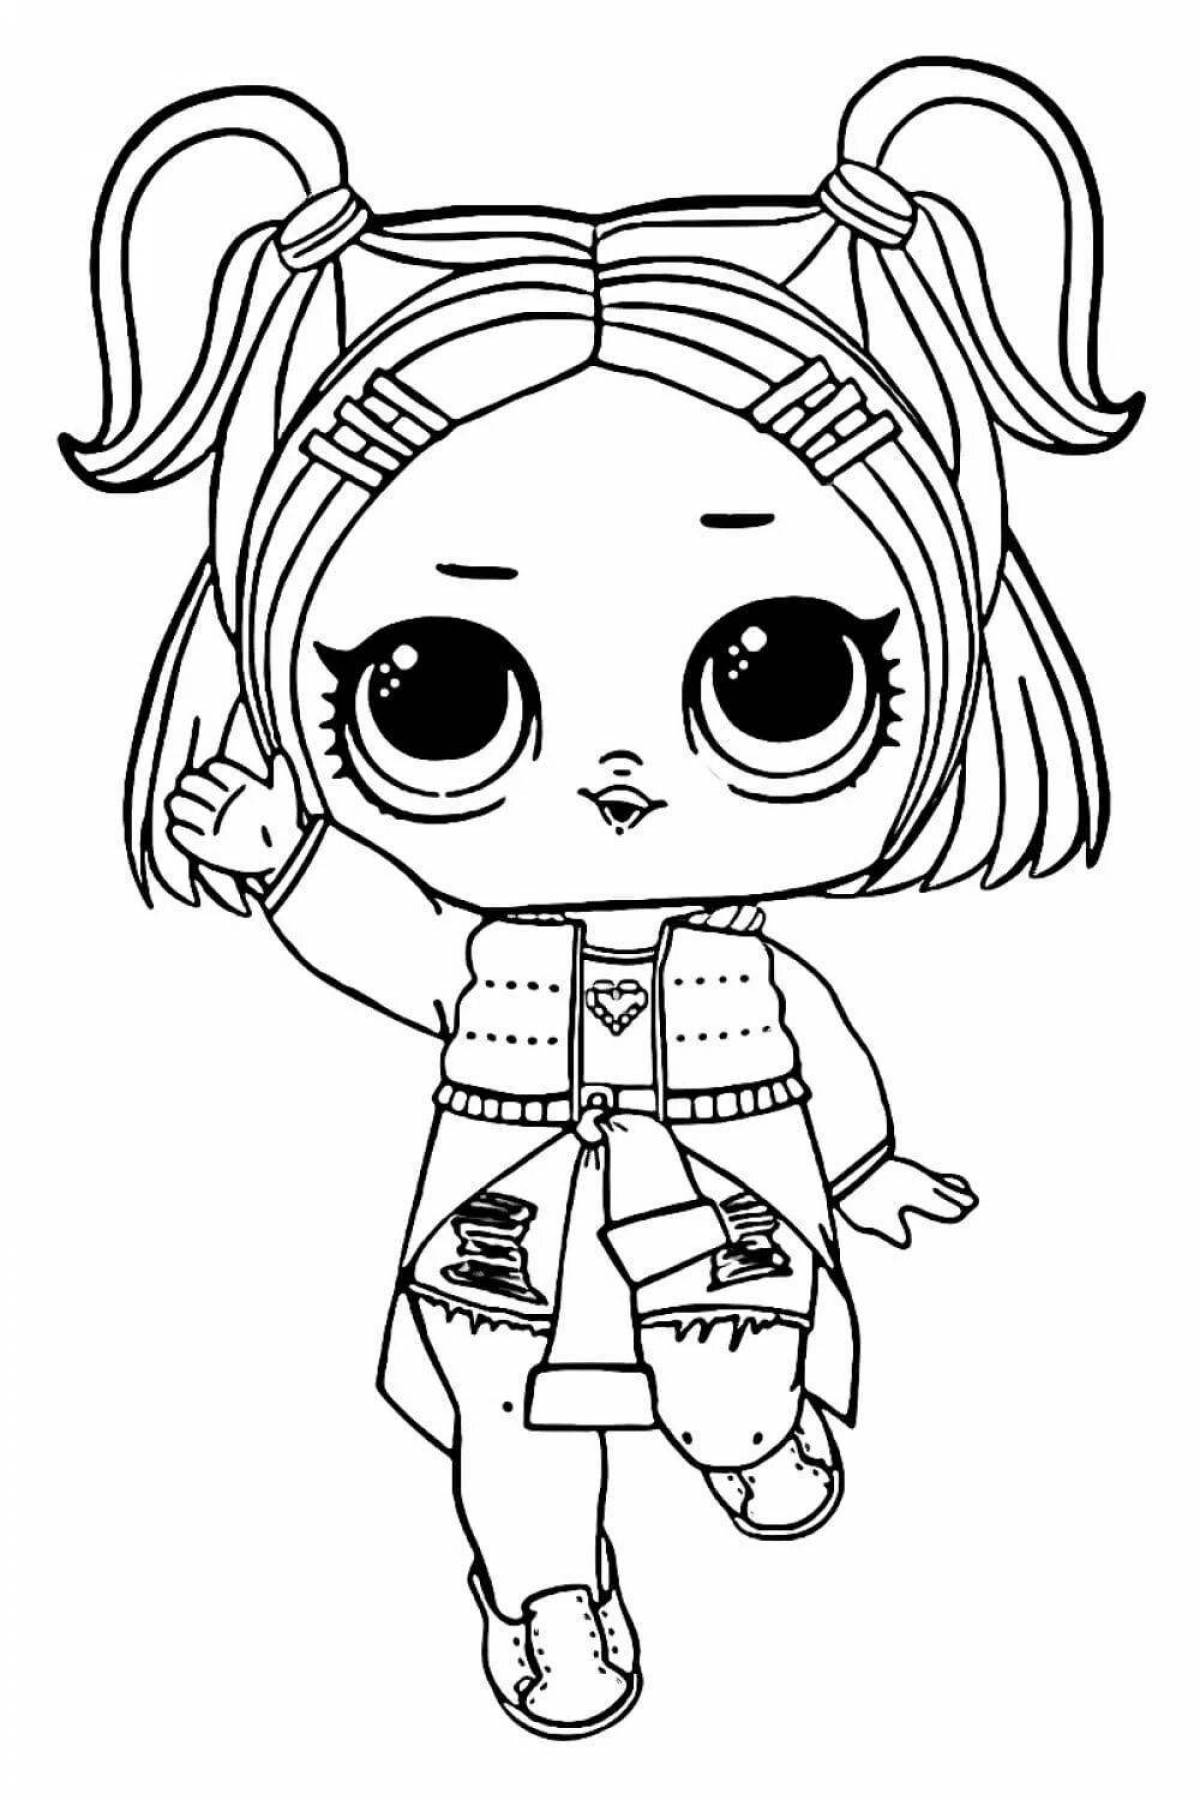 Exciting doll coloring page